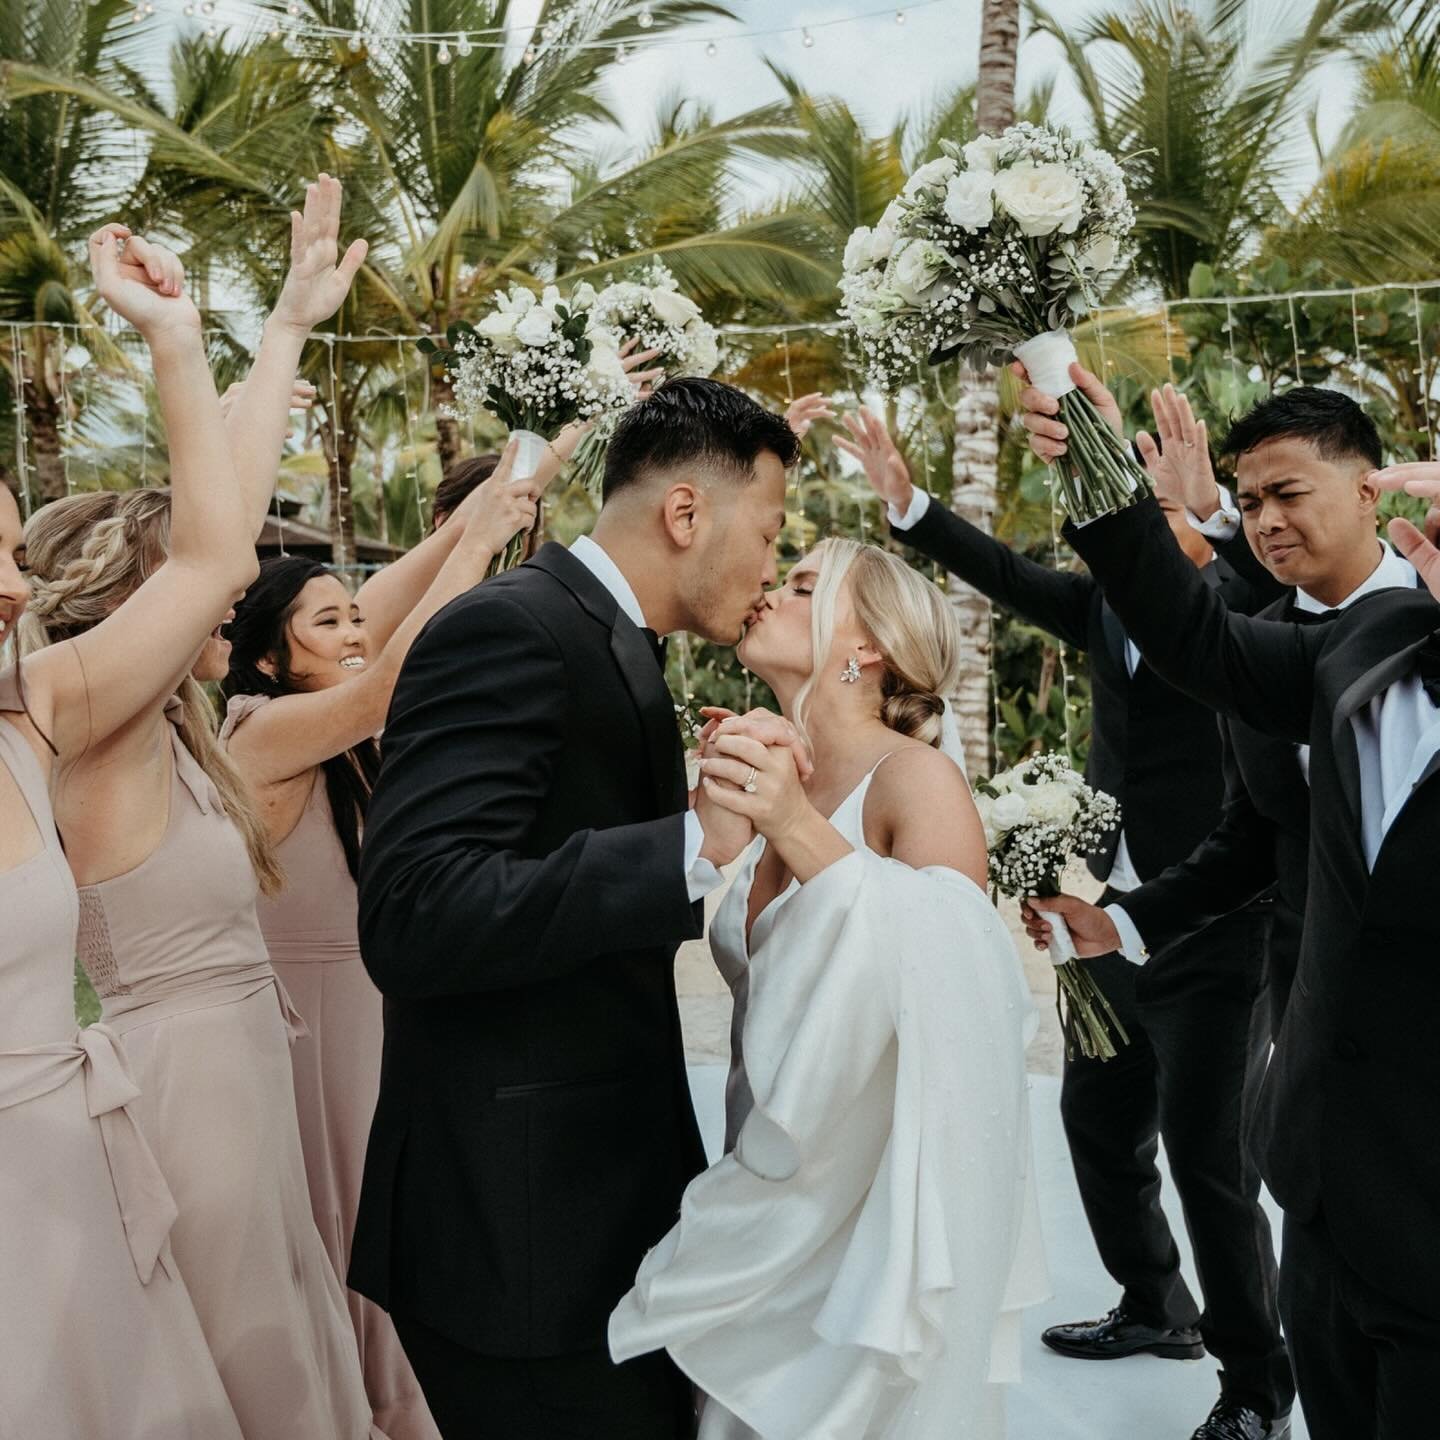 Hey lovely souls 💫Just wanted to share a little bit of what makes a wedding moment truly come to life.

🌟Picture this: It&rsquo;s your big day, surrounded by the people you love most, and every emotion is swirling around you. From nervous excitemen